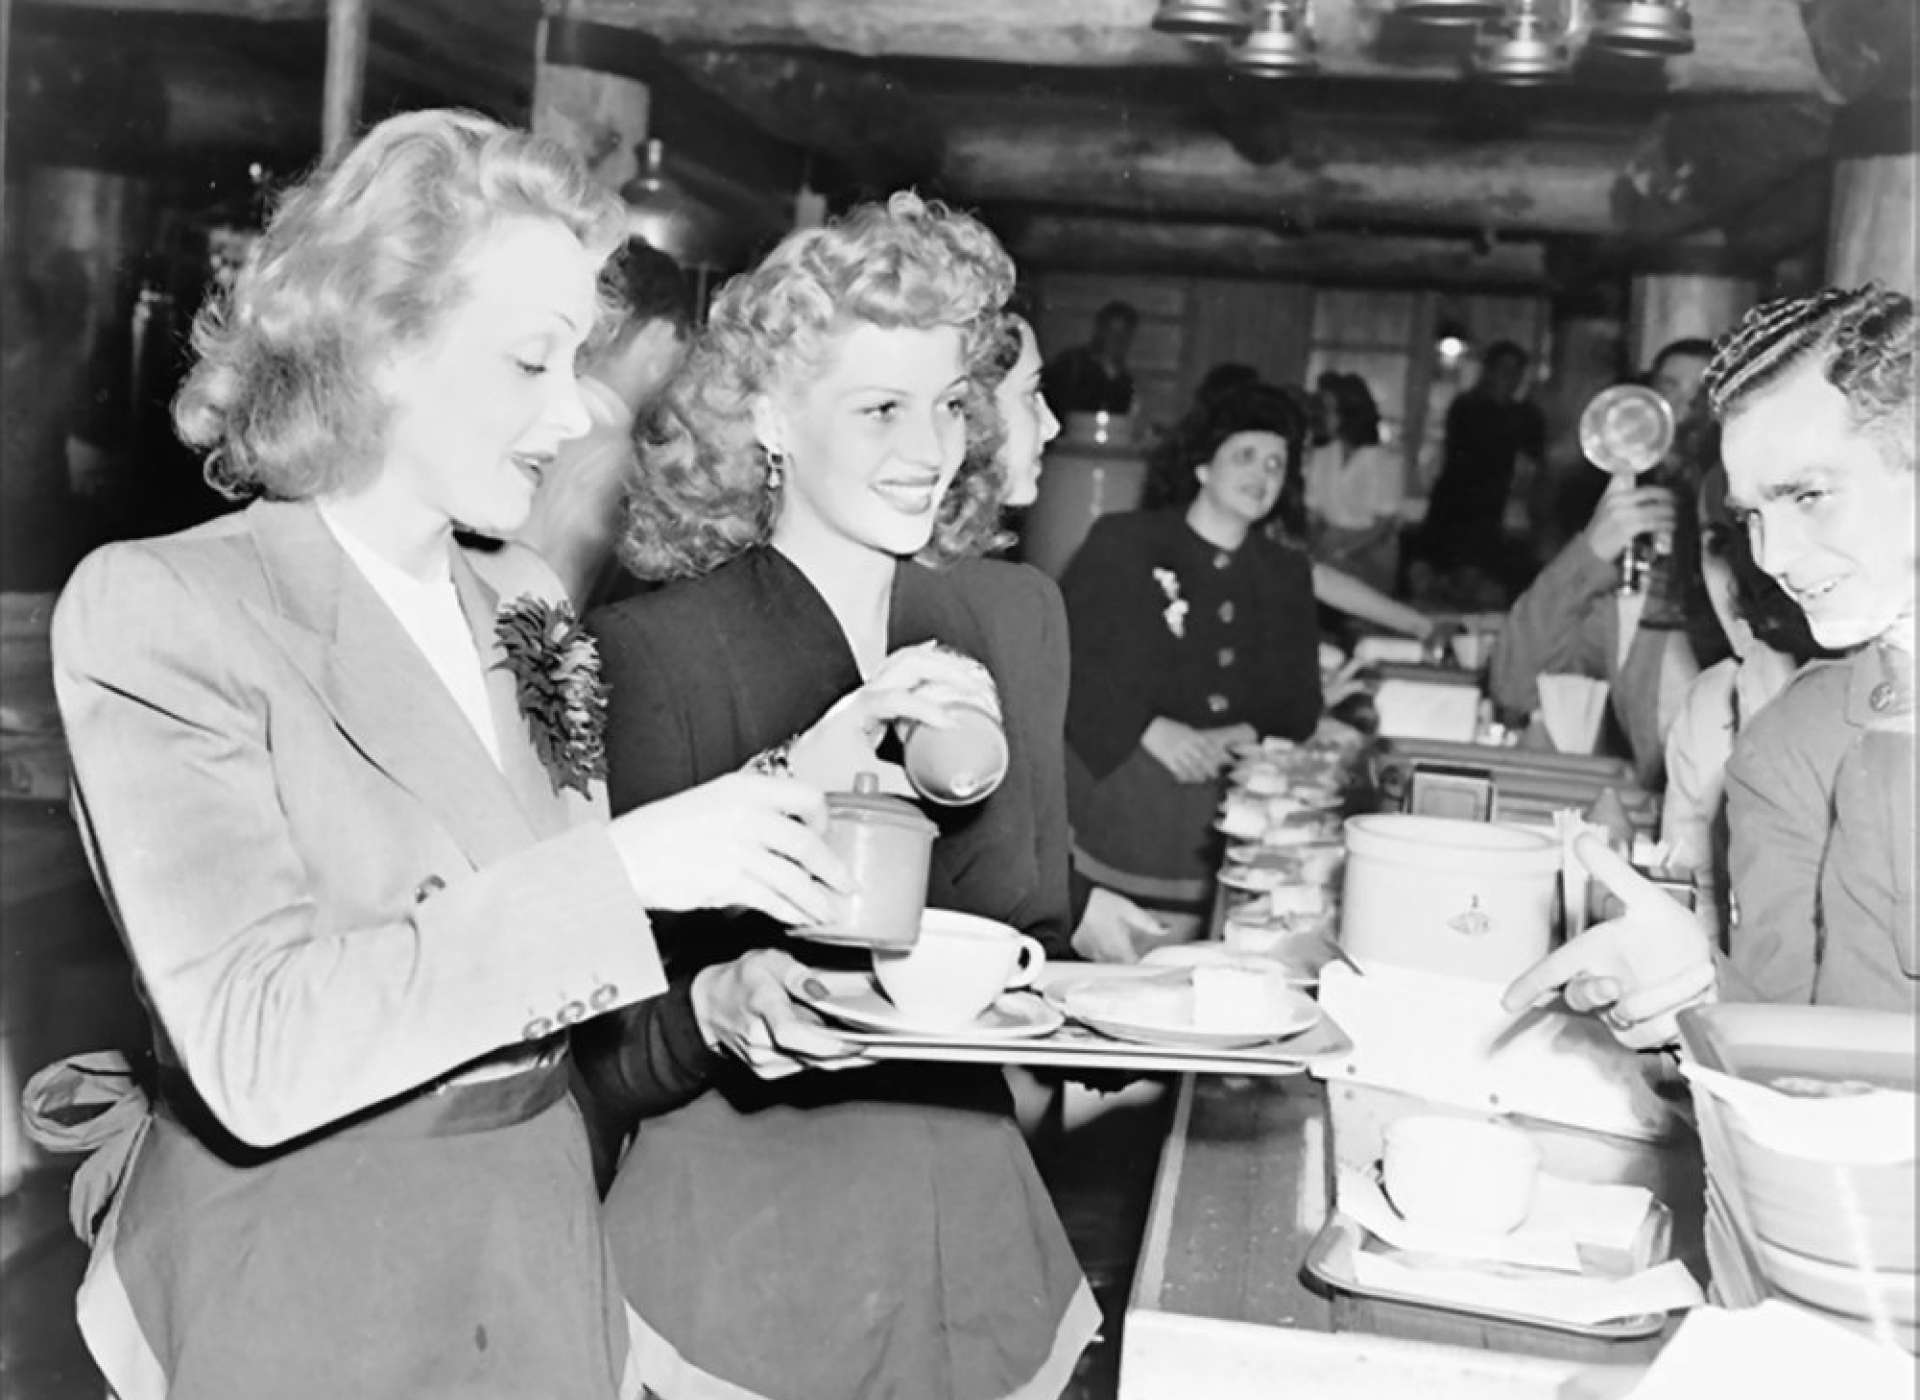 Actresses Marlene Dietrich and Rita Hayworth serve food to soldiers at the Hollywood Canteen in Hollywood, California.